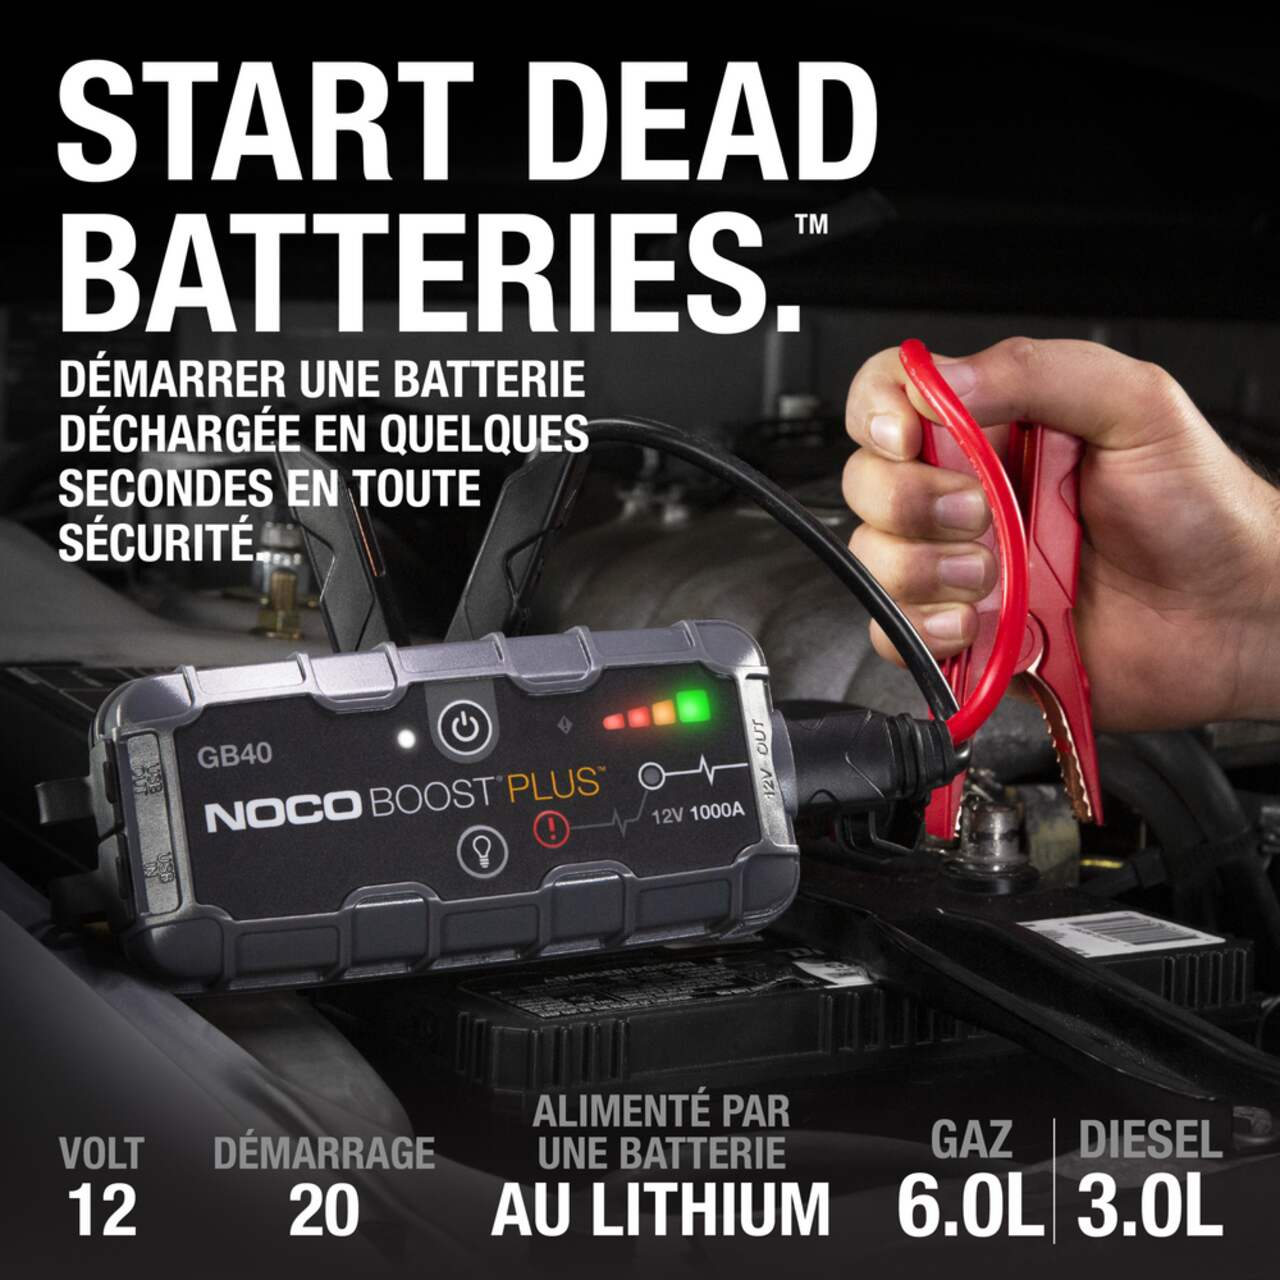 https://media-www.canadiantire.ca/product/automotive/light-auto-parts/auto-battery-accessories/0111907/noco-genius-boost-gb40-d12a1420-8a0e-463d-a051-6c32e84bef75.png?imdensity=1&imwidth=1244&impolicy=mZoom